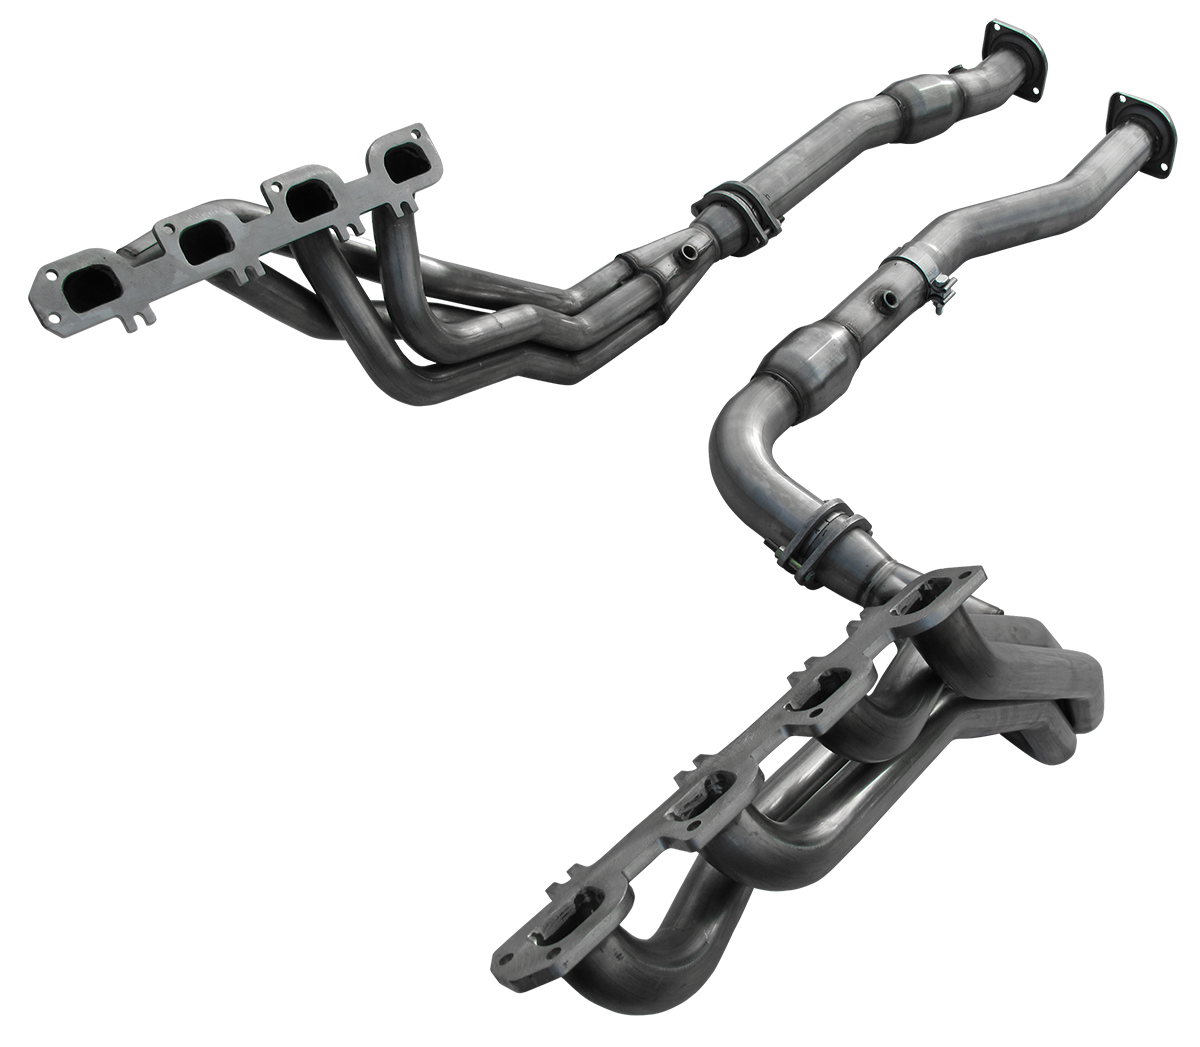 2006-2010 Jeep SRT8 6.1L V8 American Racing Headers 1 3/4" x 3" Long Tube Headers w/3" Offroad Connection Pipes